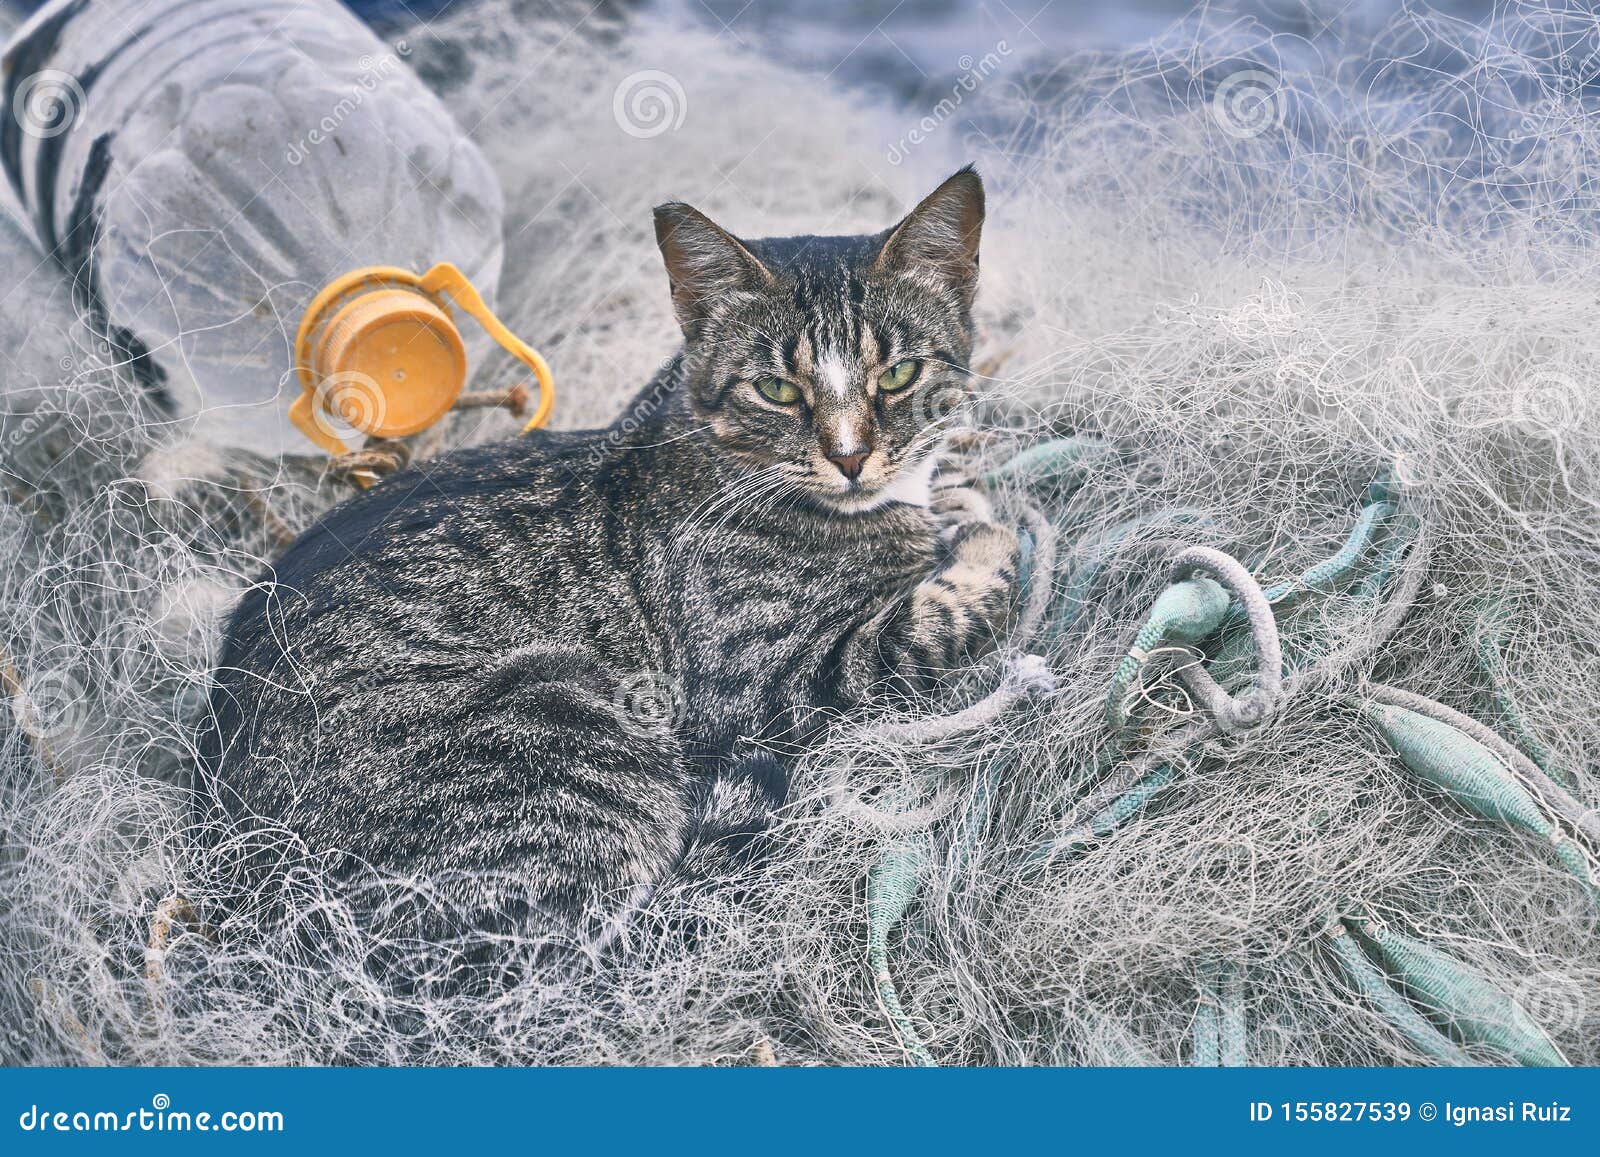 Cat Resting in a Phishing Nets Stock Image - Image of port, outdoor ...